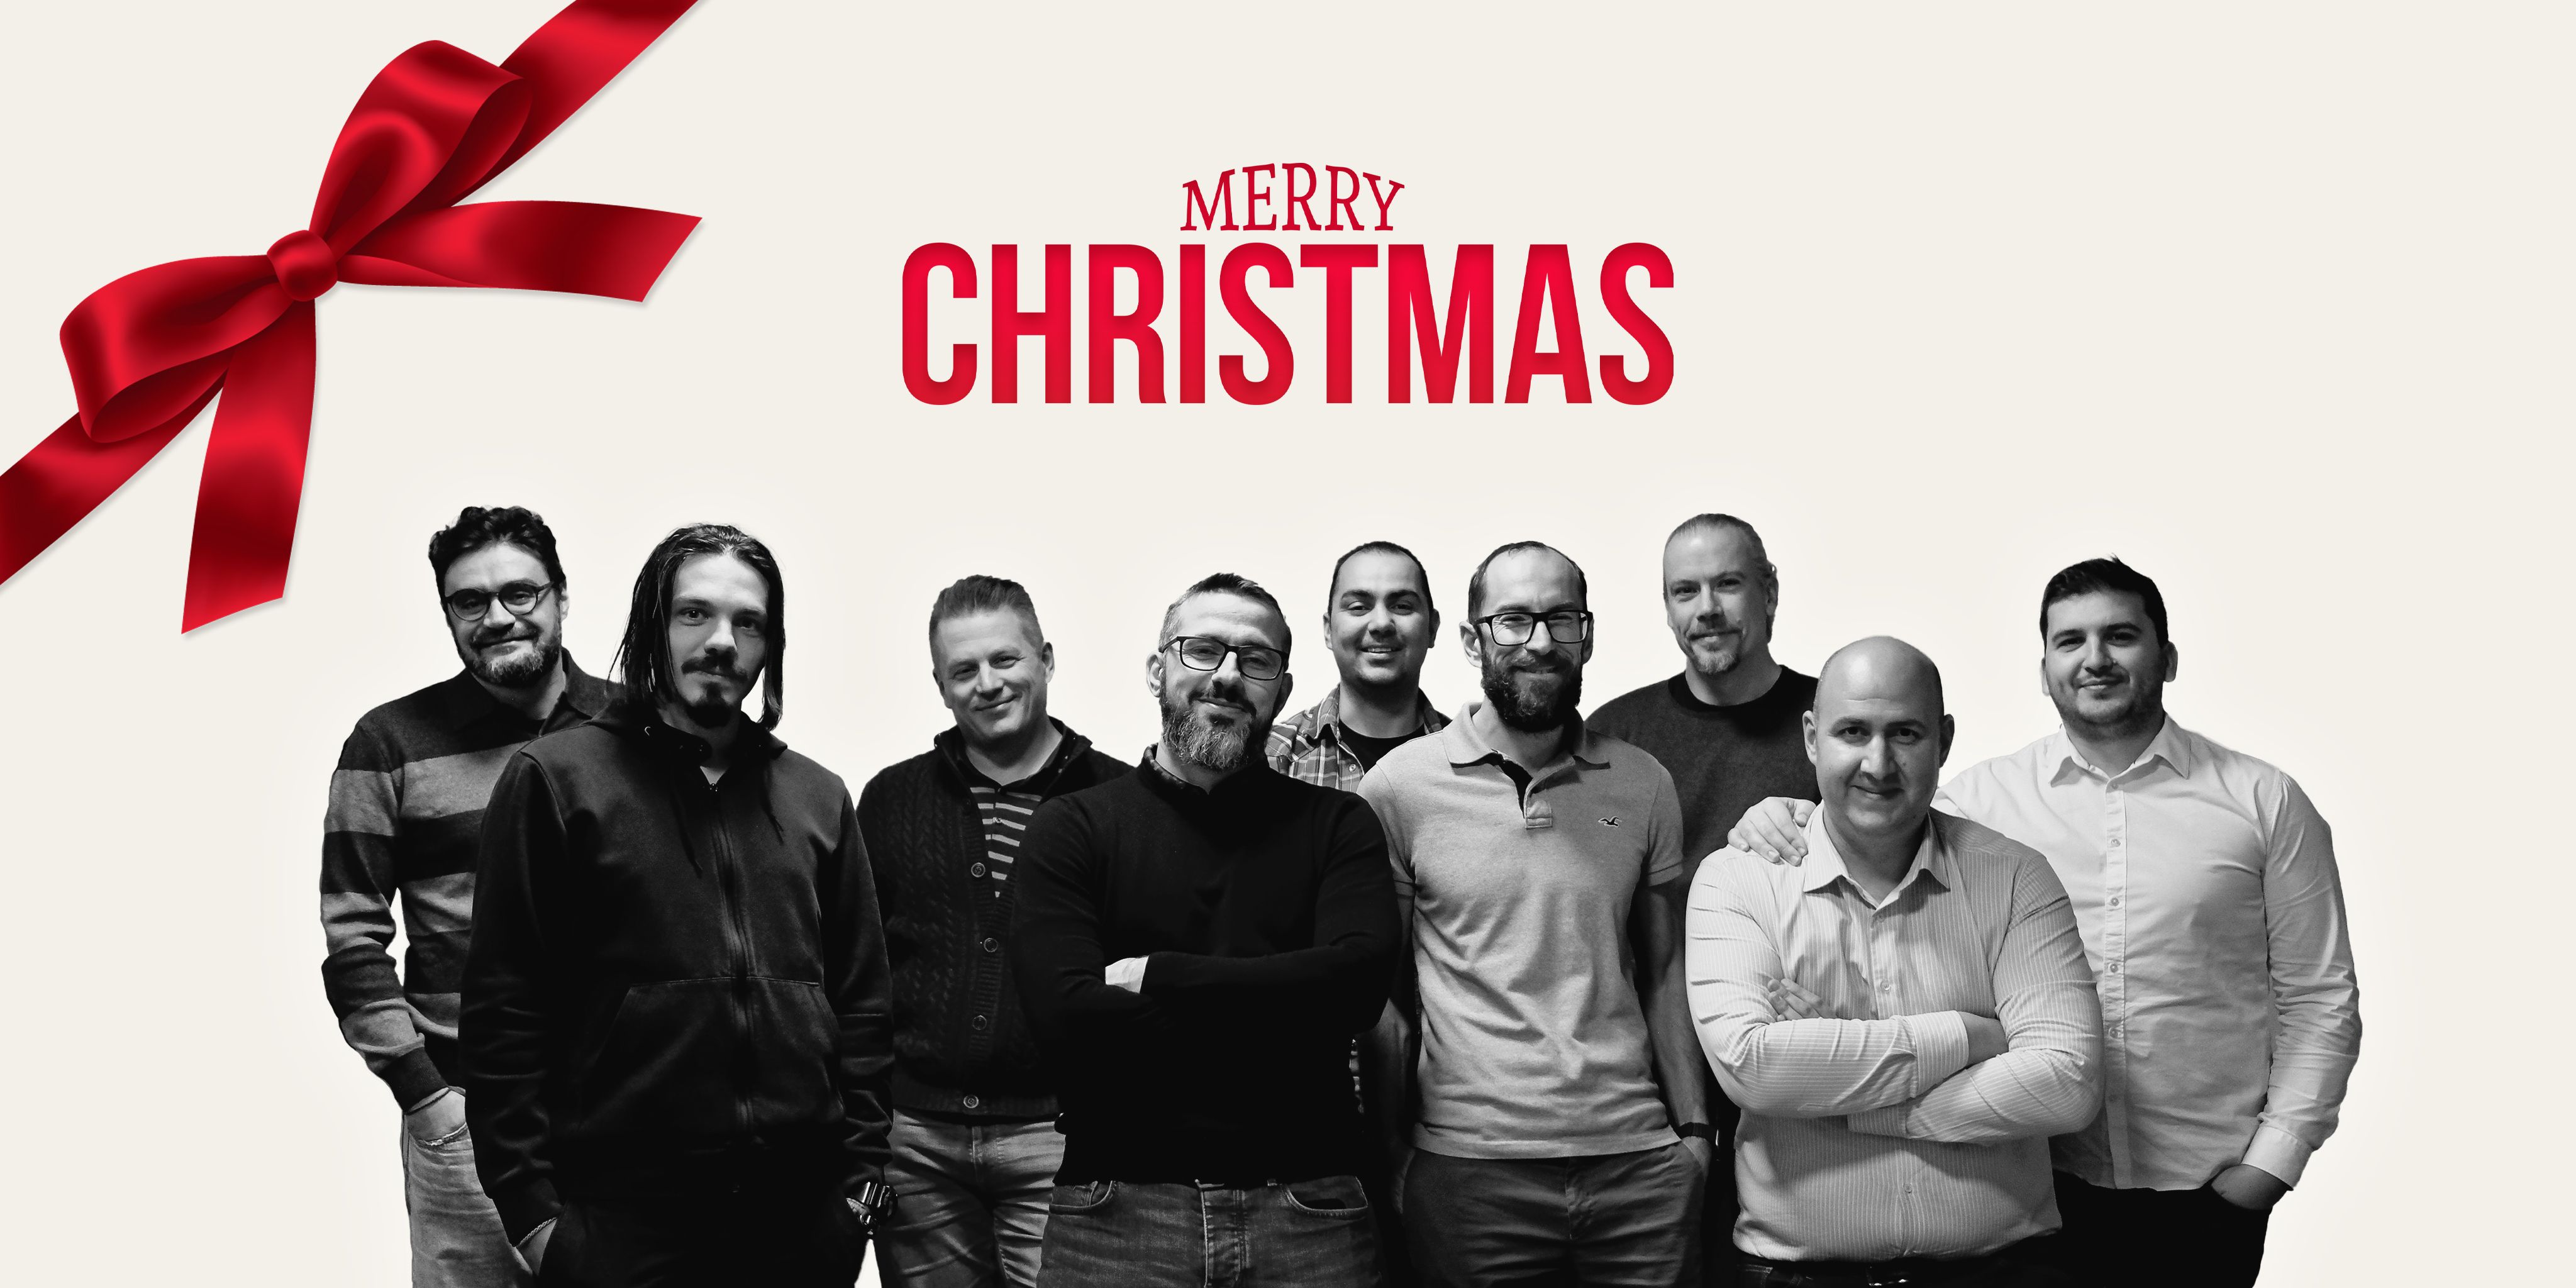 Vereign wishes you a Happy Festive Season, and a Fantastic New Year